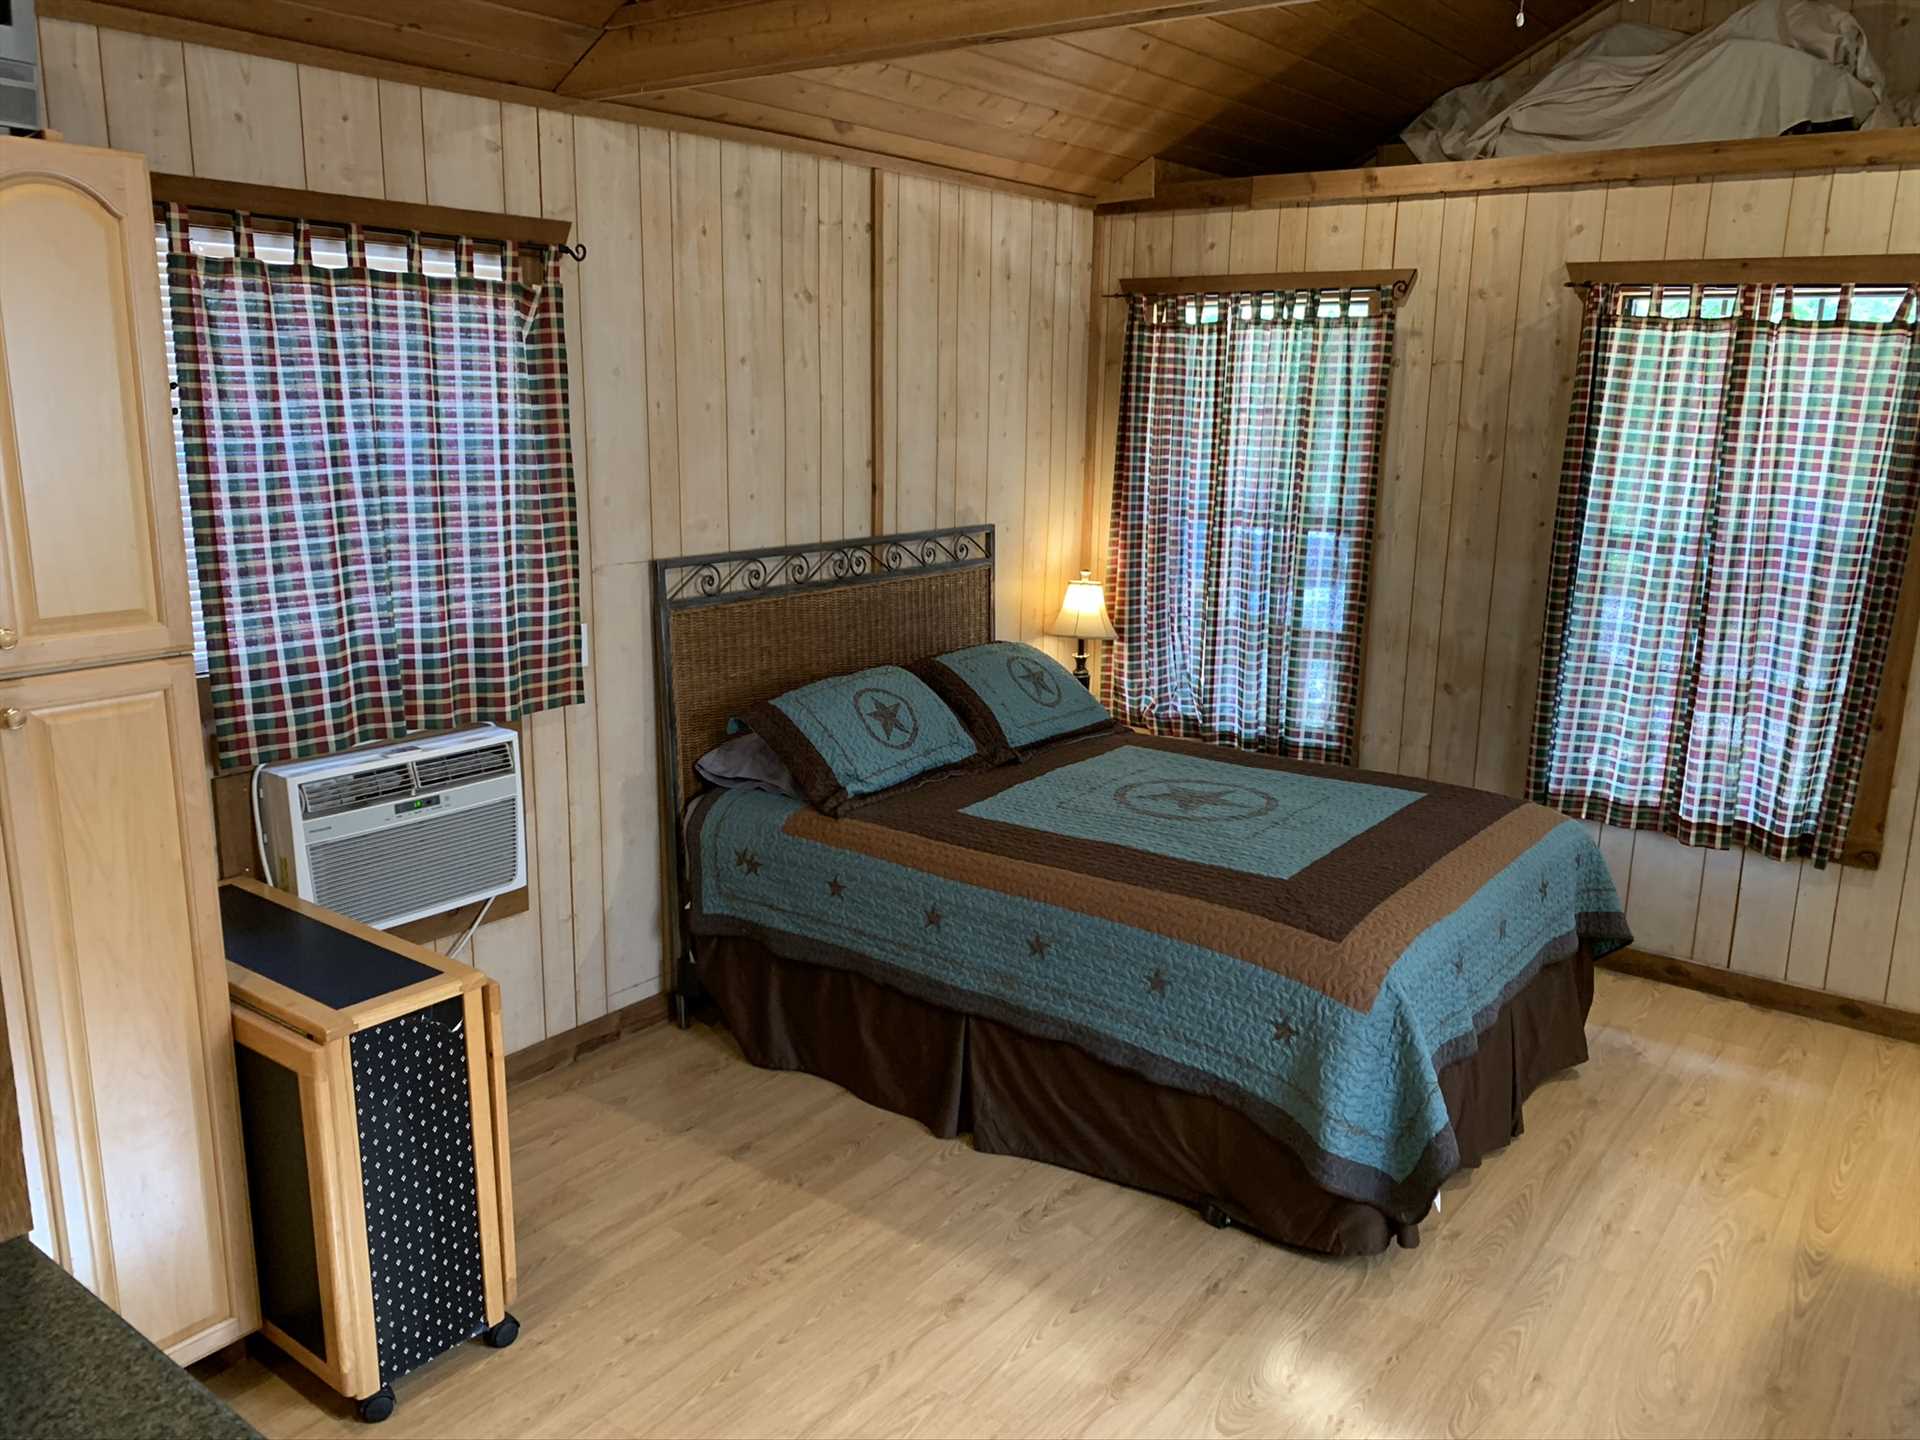                                                 With luxurious sleeping space for up to four, the cabin serves equally well as a family getaway, or as a couples' retreat.